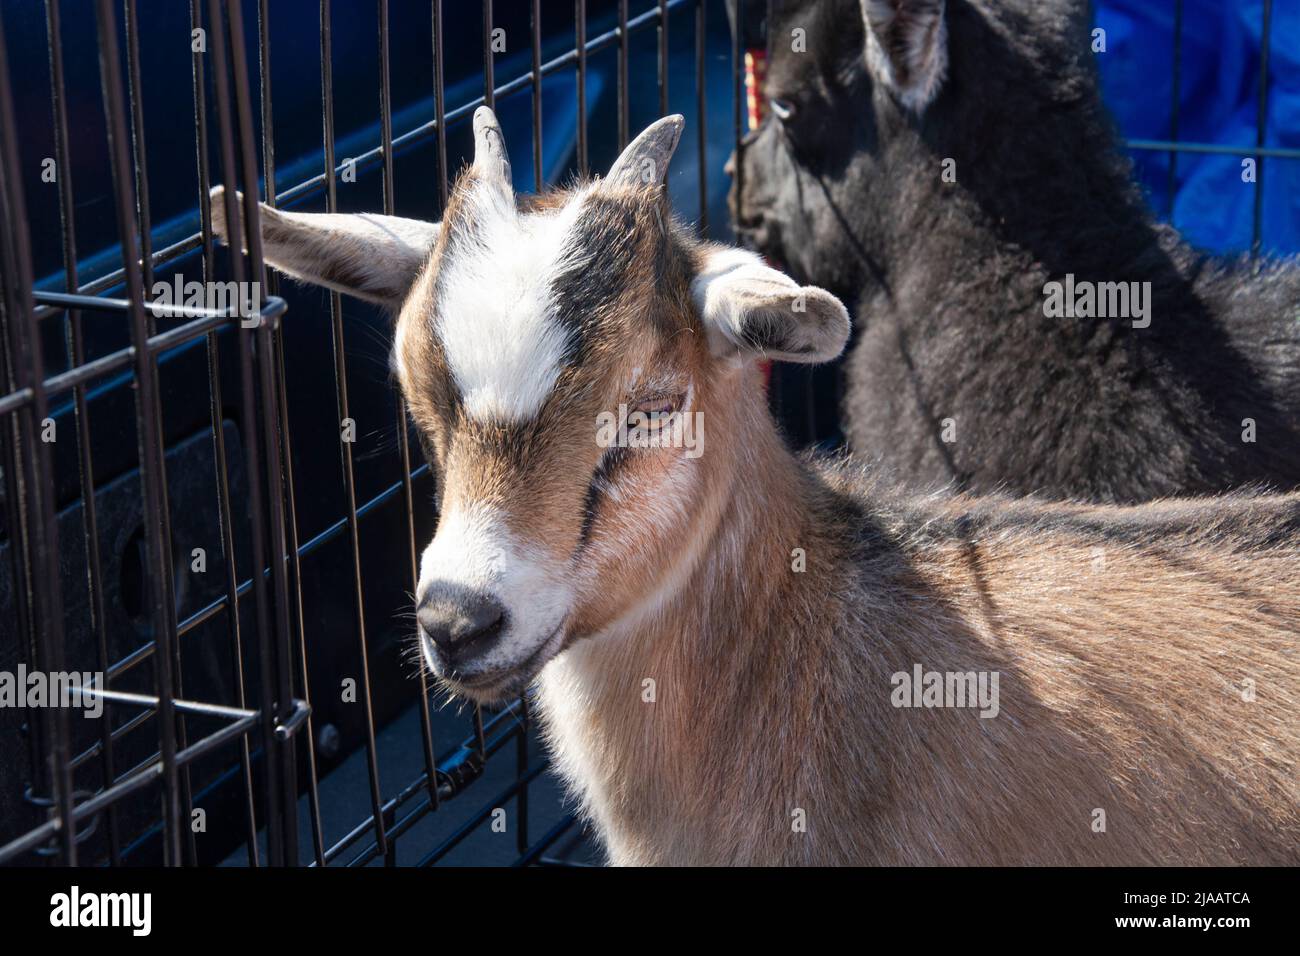 Baby kid goat with horns in livestock pen at farmer's market Stock Photo